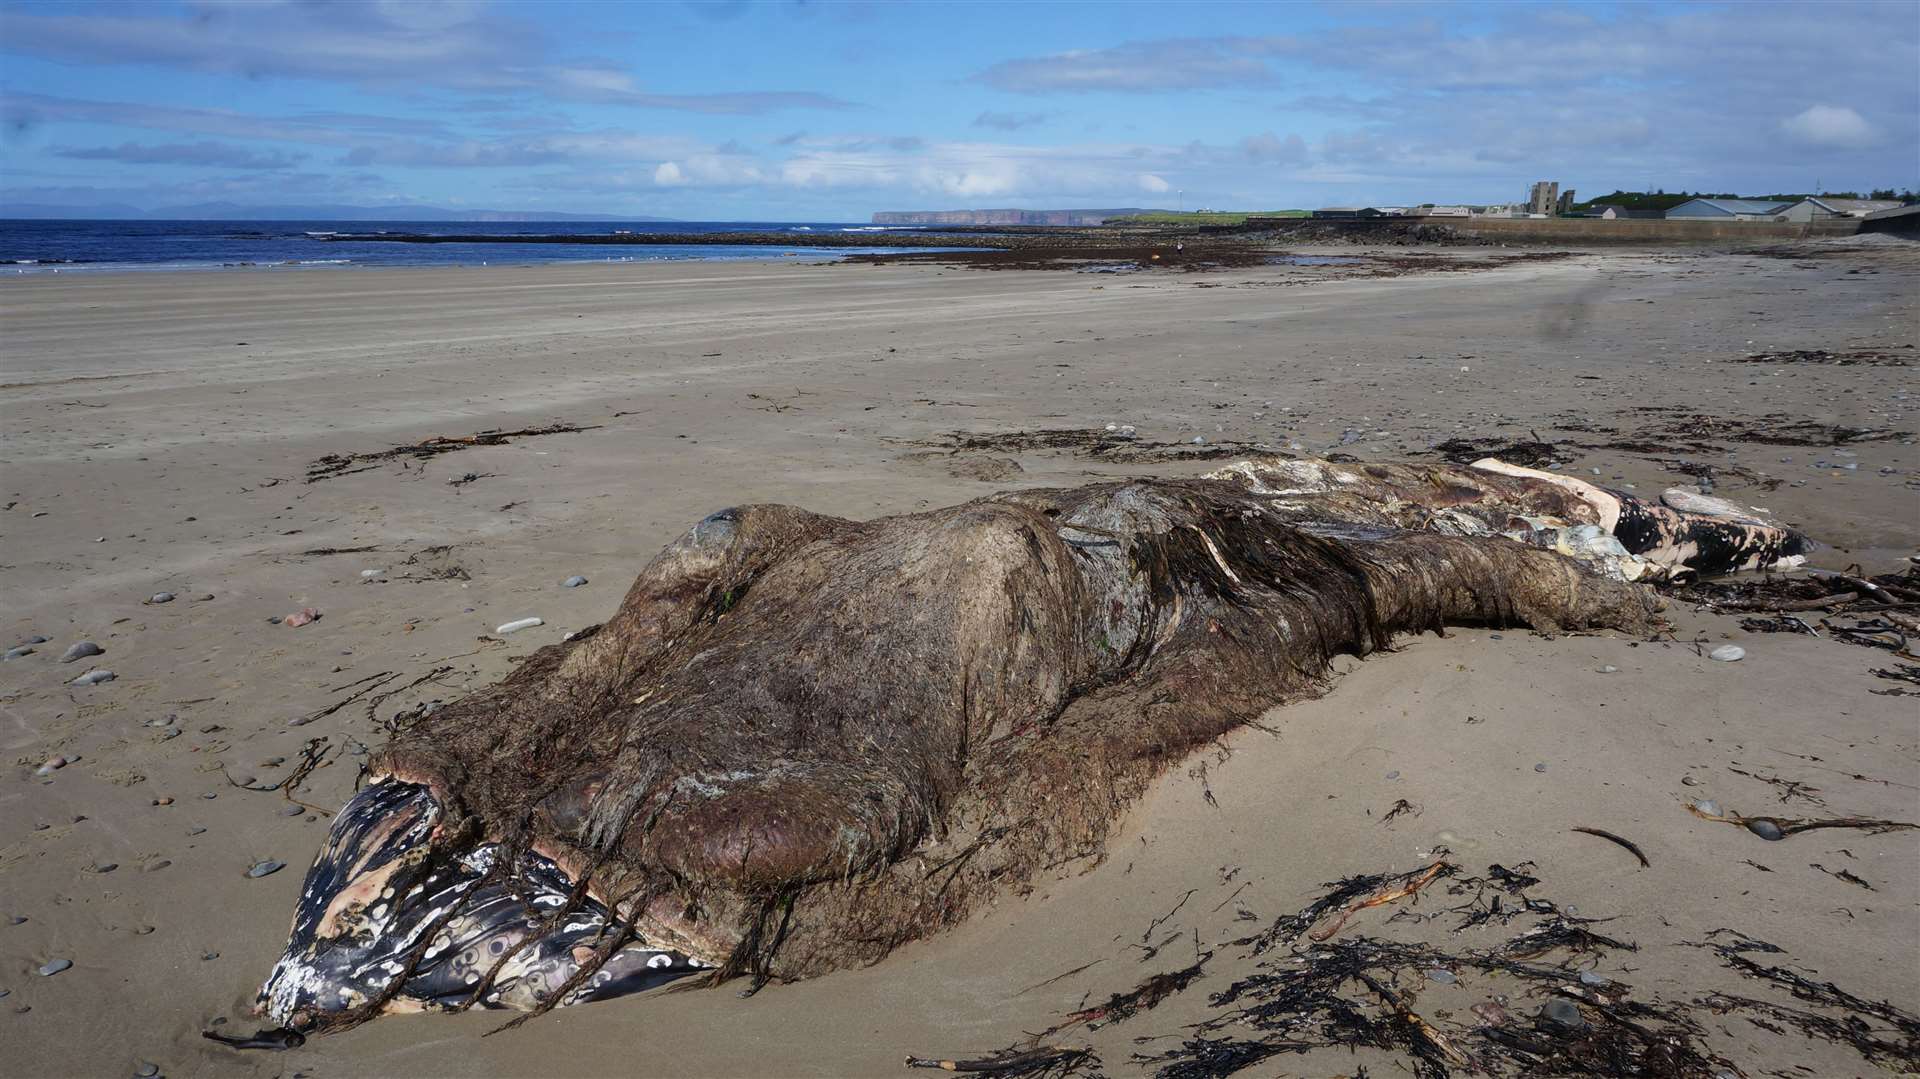 The remains of the young humpback whale had drifted onto Thurso beach. Picture: DGS